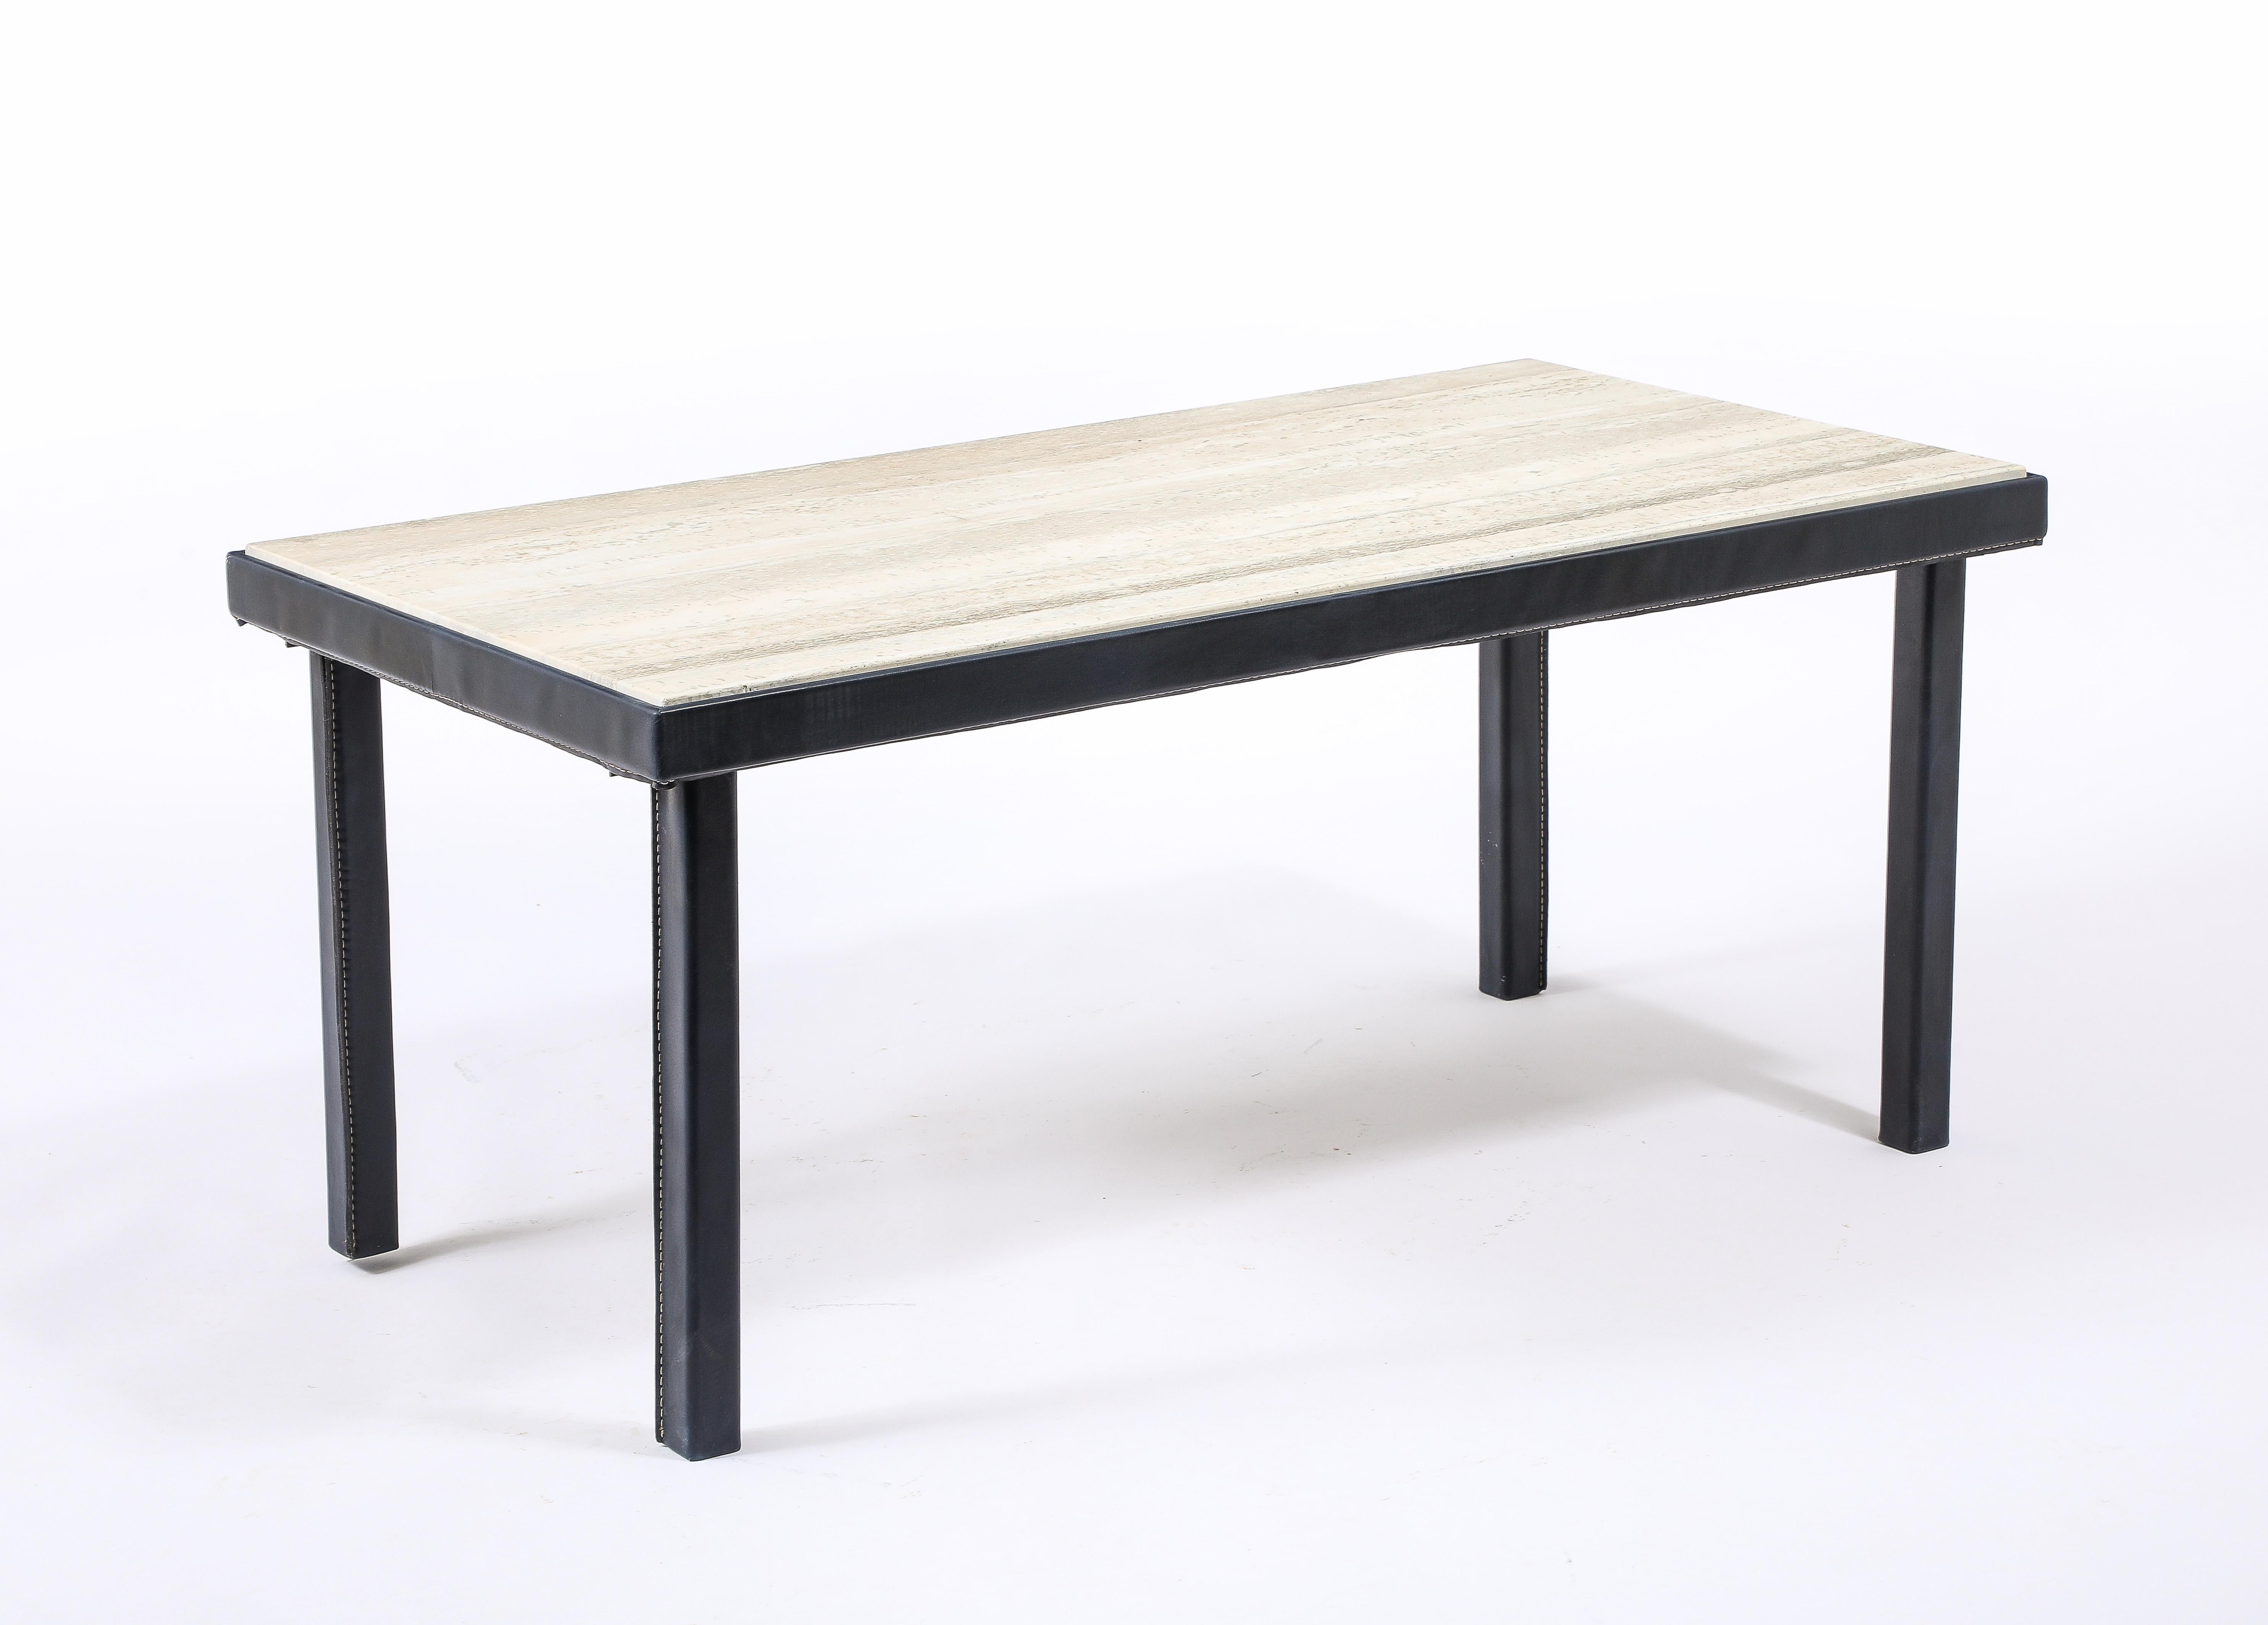 Jacques Adnet Stitched Blue Leather & Travertine Coffee Table, France 1950's For Sale 1